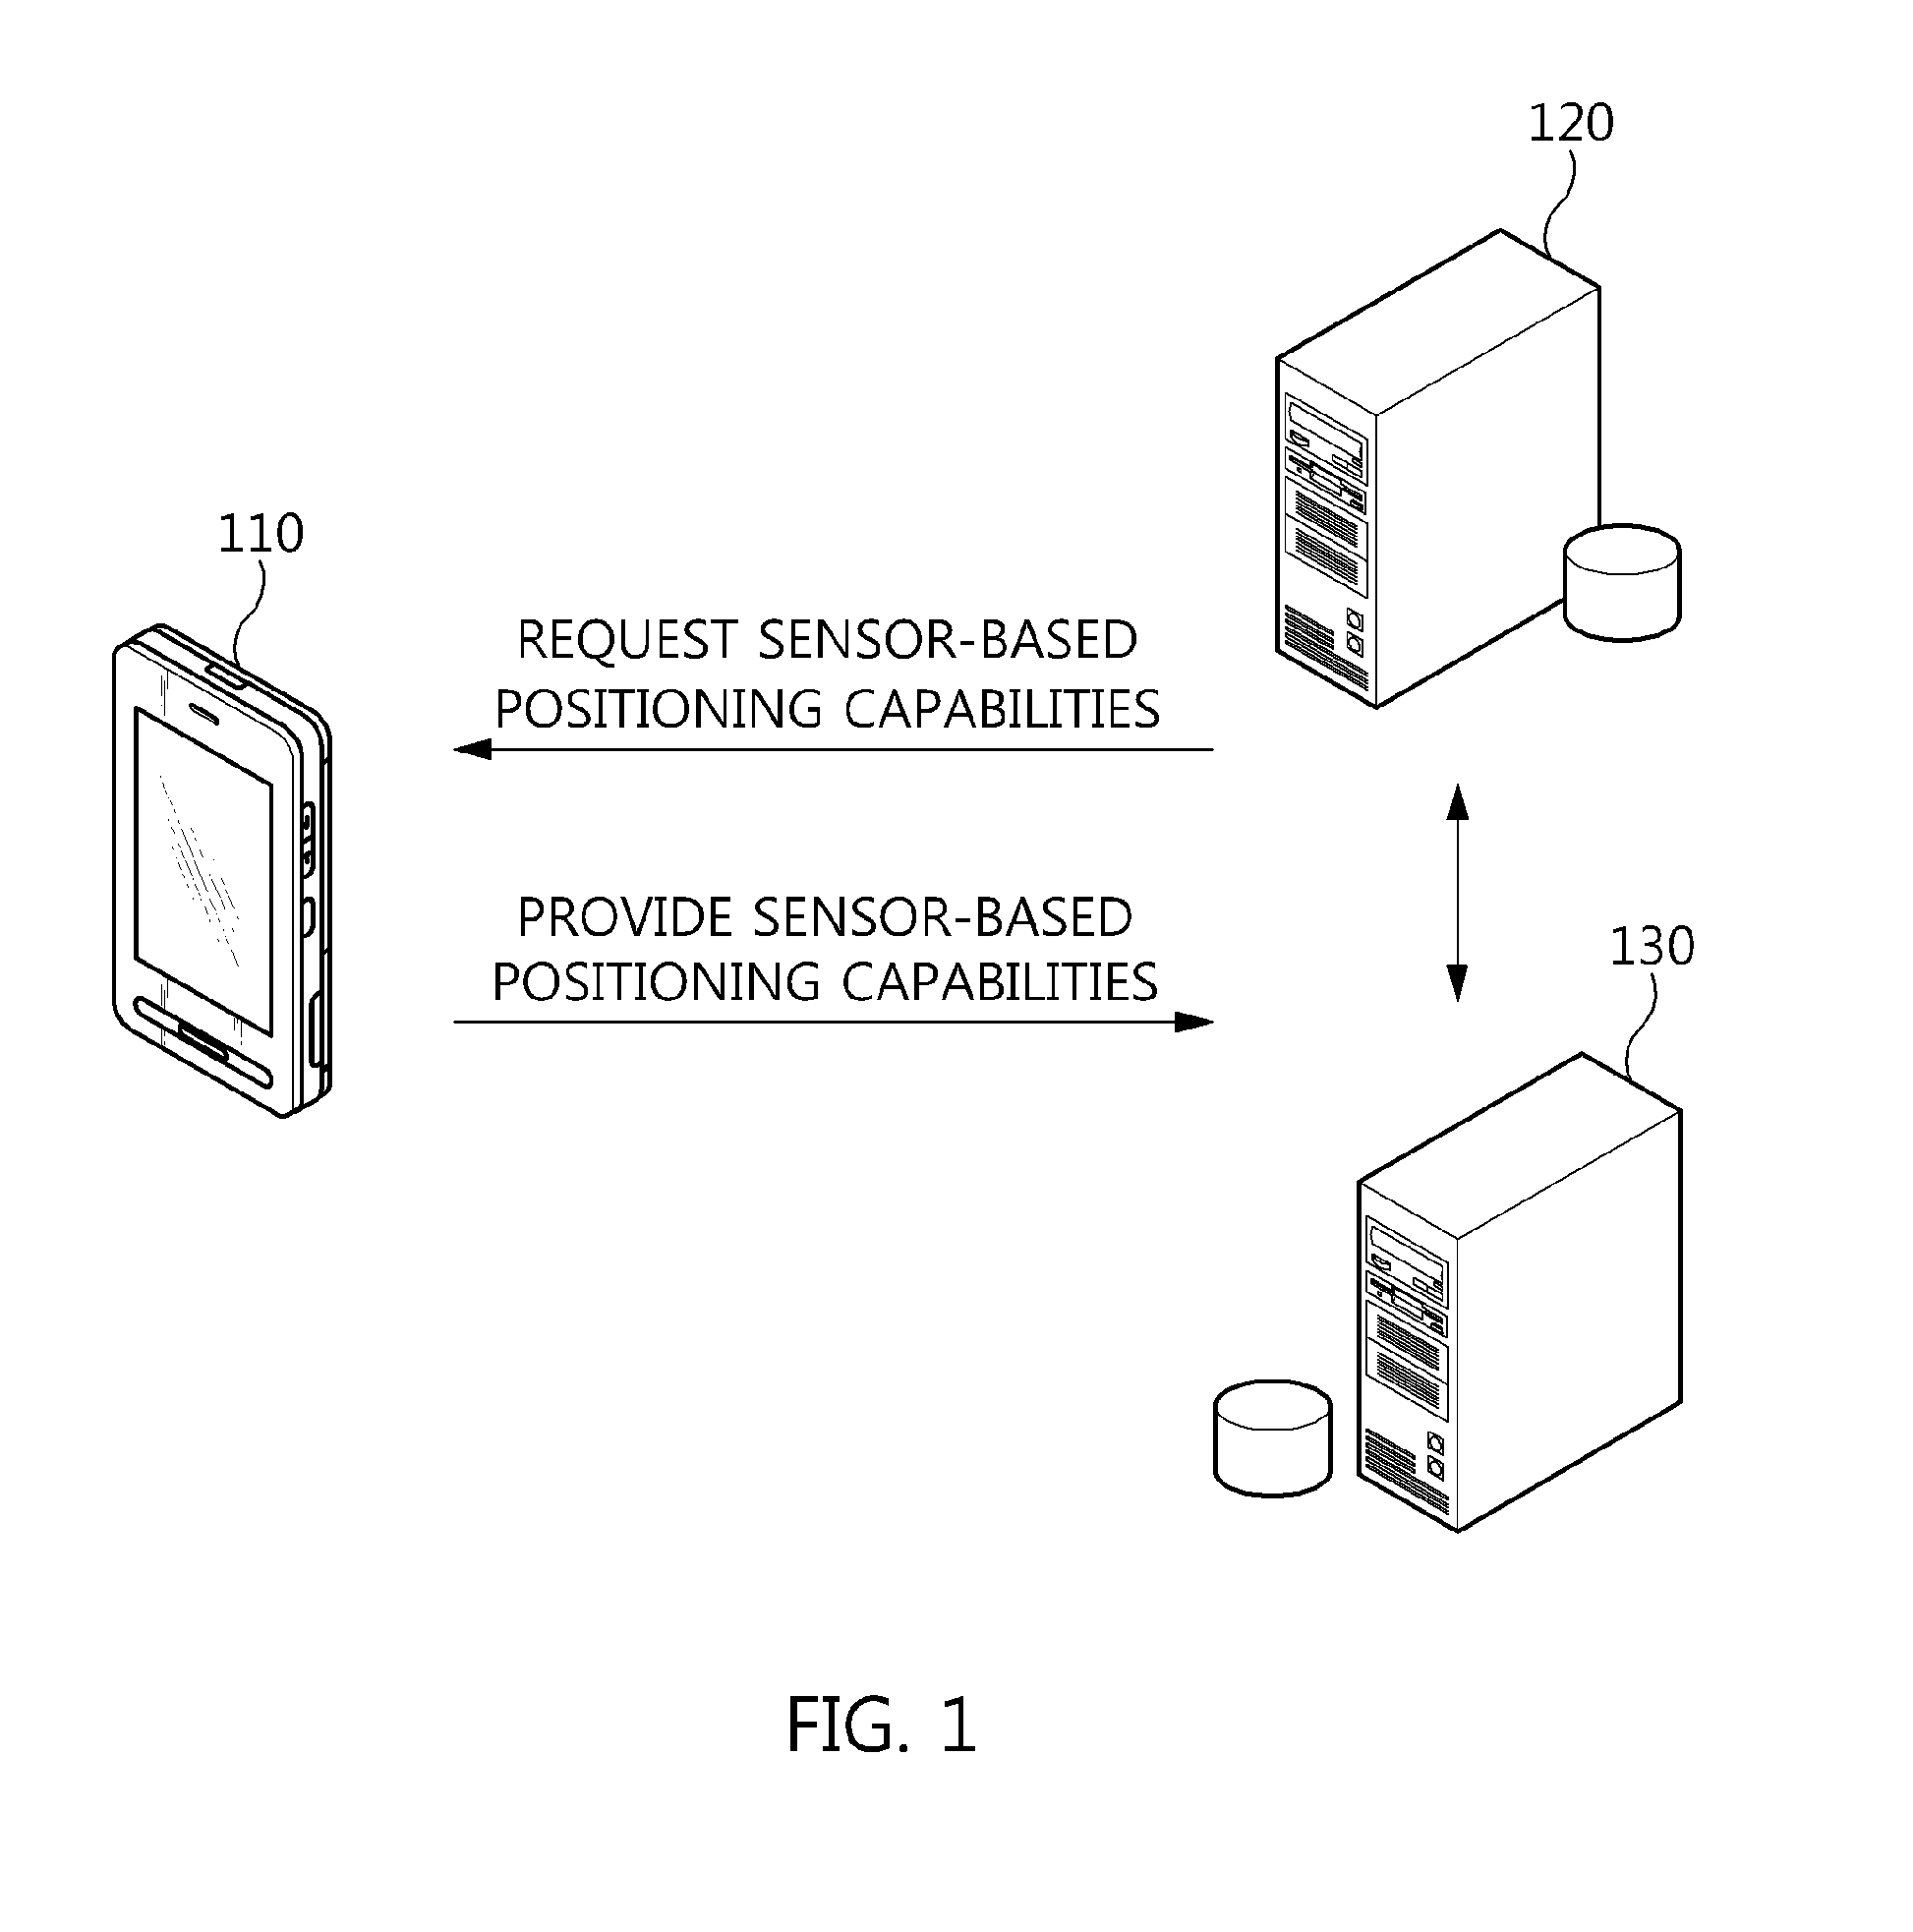 Method and apparatus for estimating location of pedestrian using step length estimation model parameters